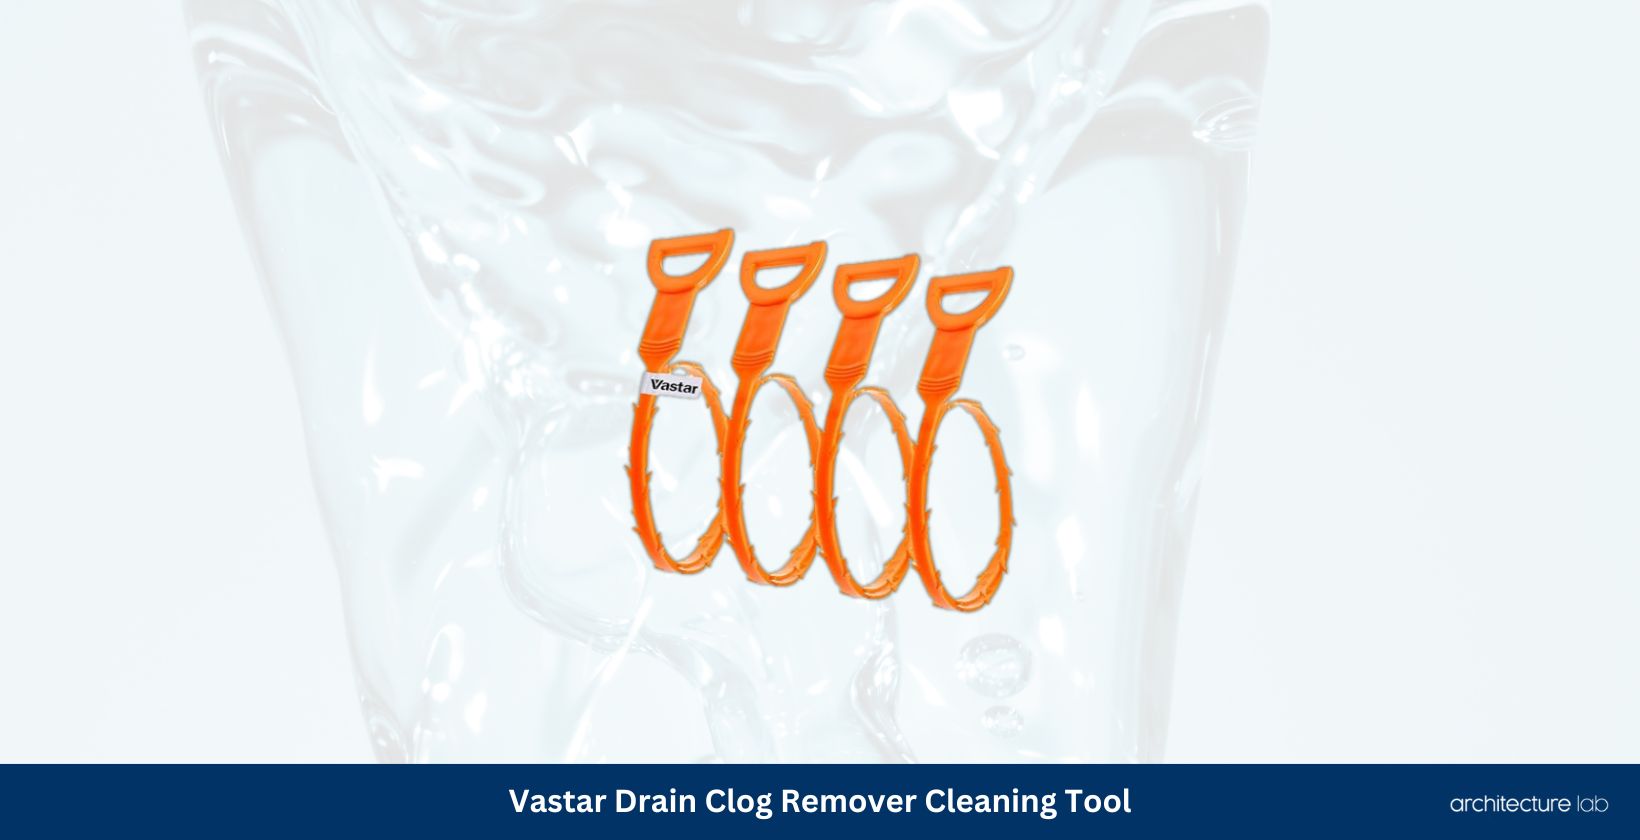 Vastar drain clog remover cleaning tool